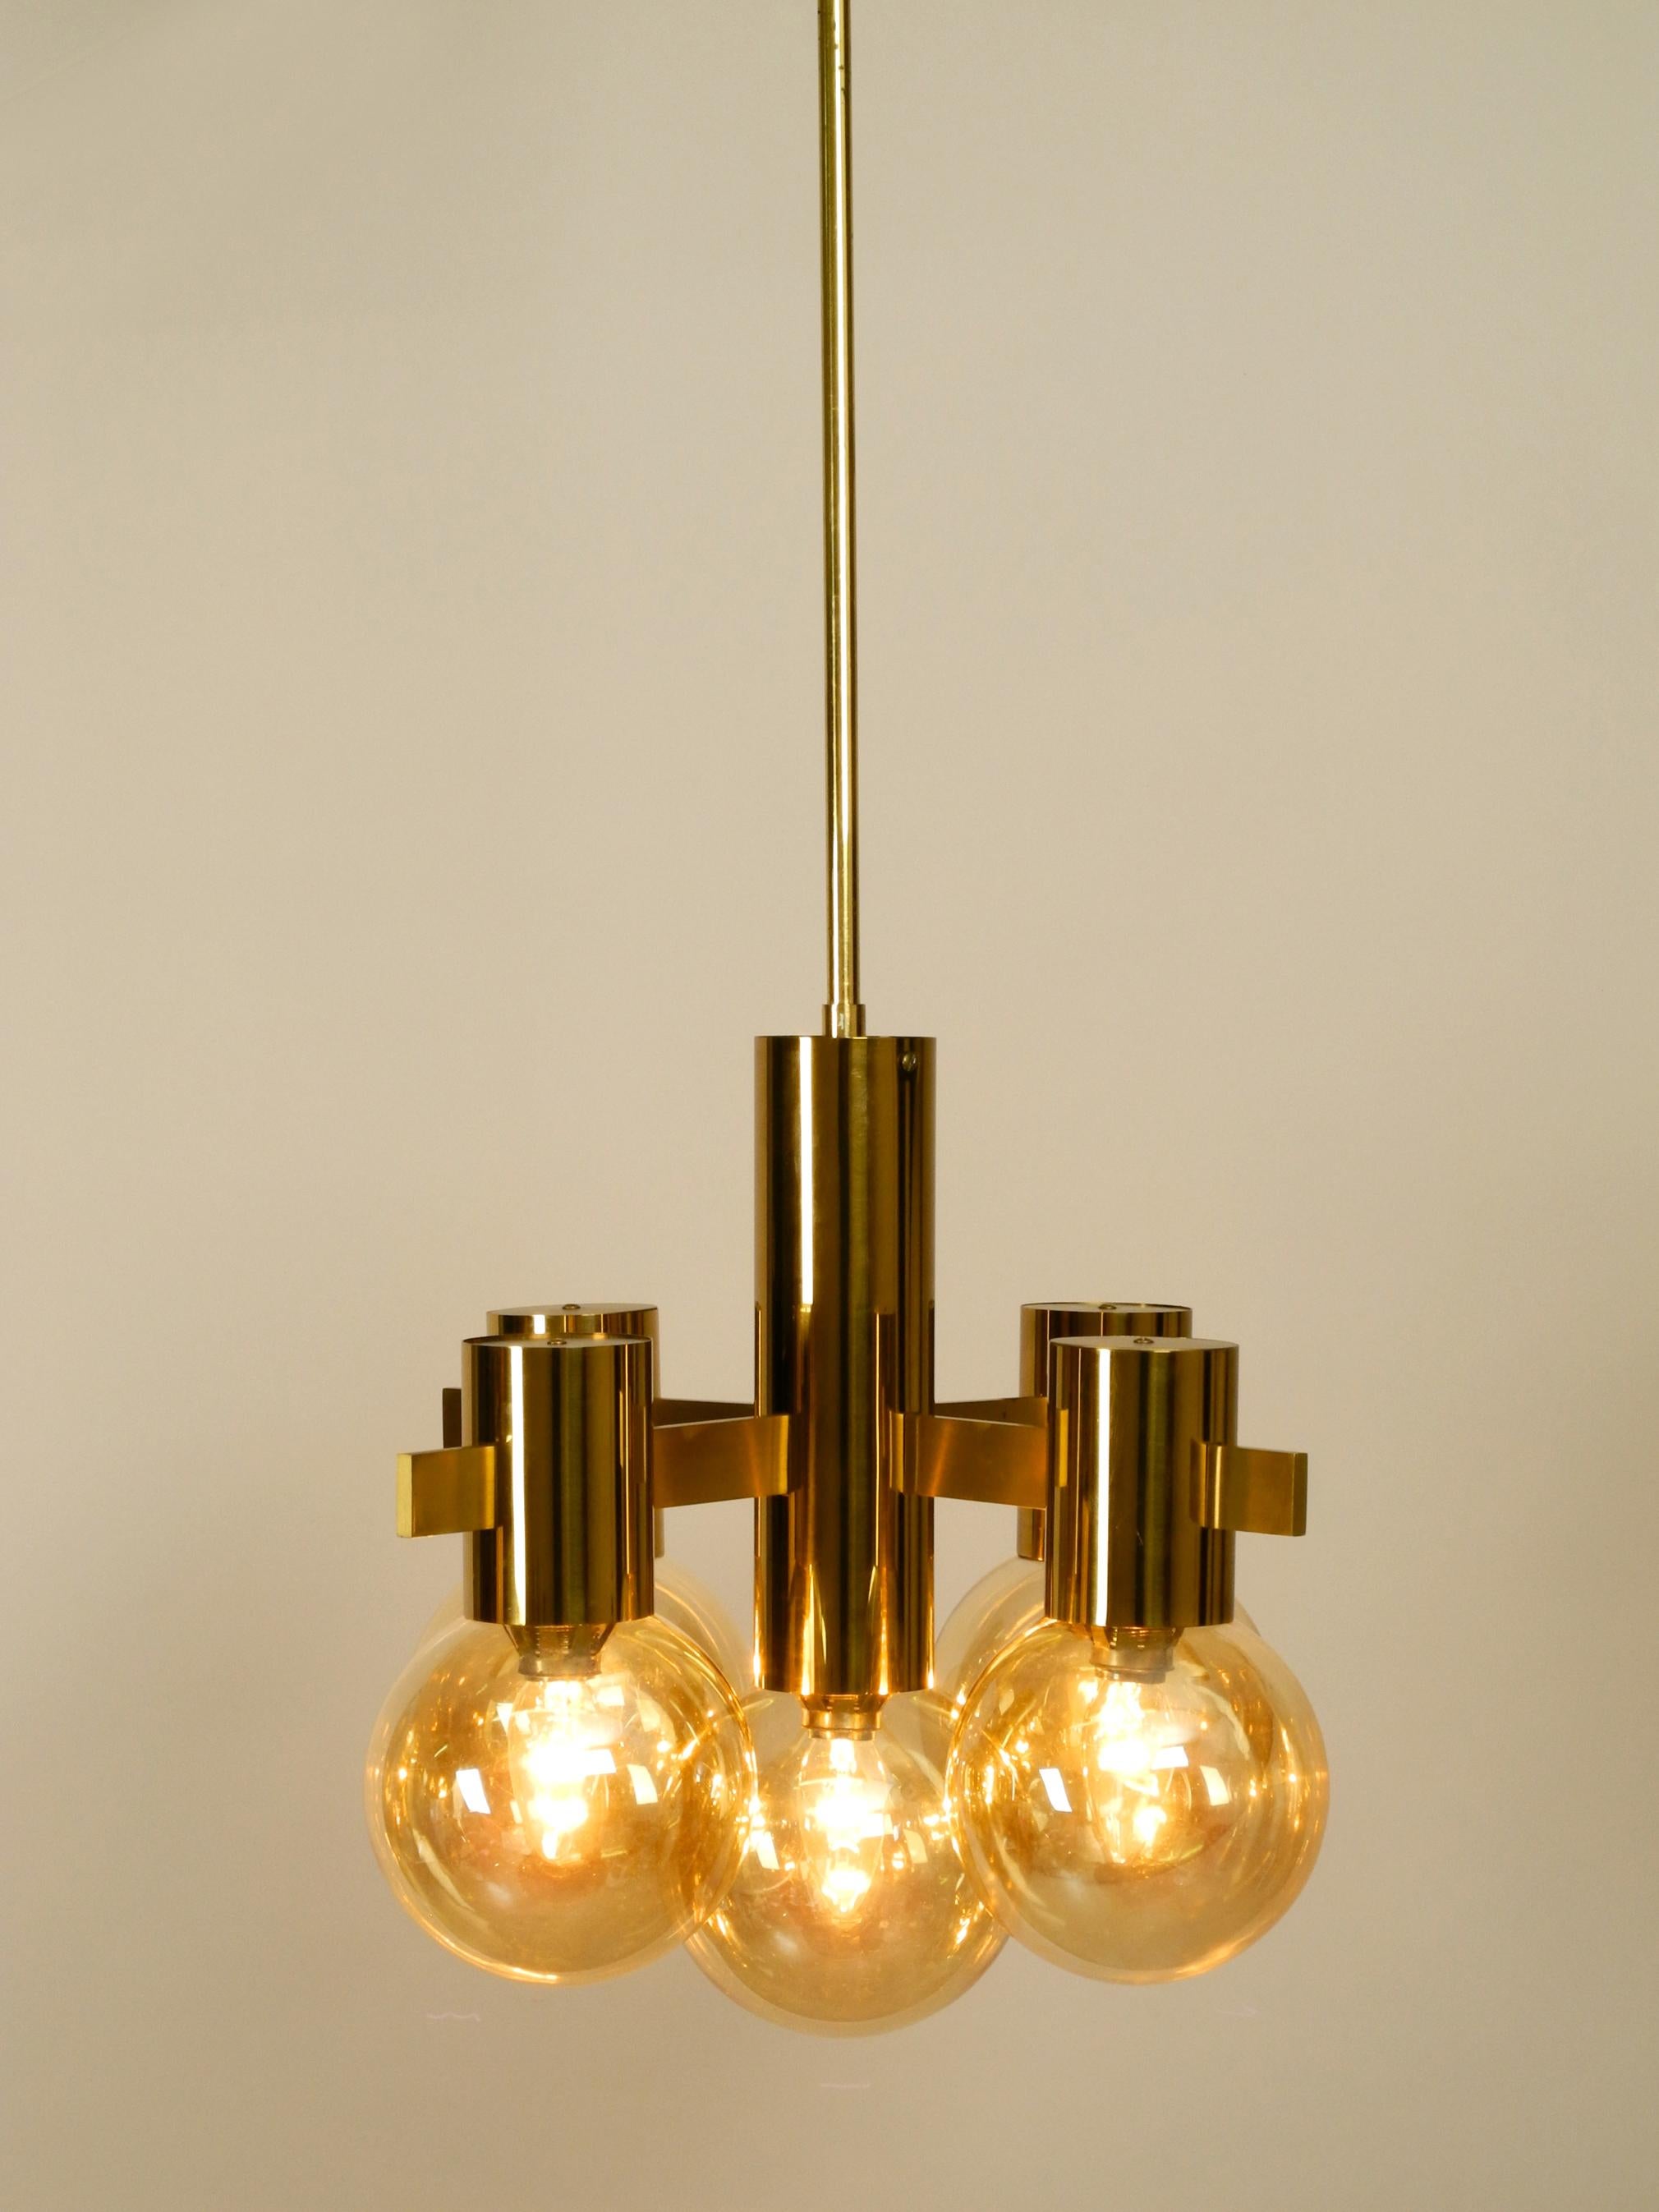 Beautiful 1960s Brass Ceiling Lamp by Hans Agne Jakobsson with 5 Glass Balls 4